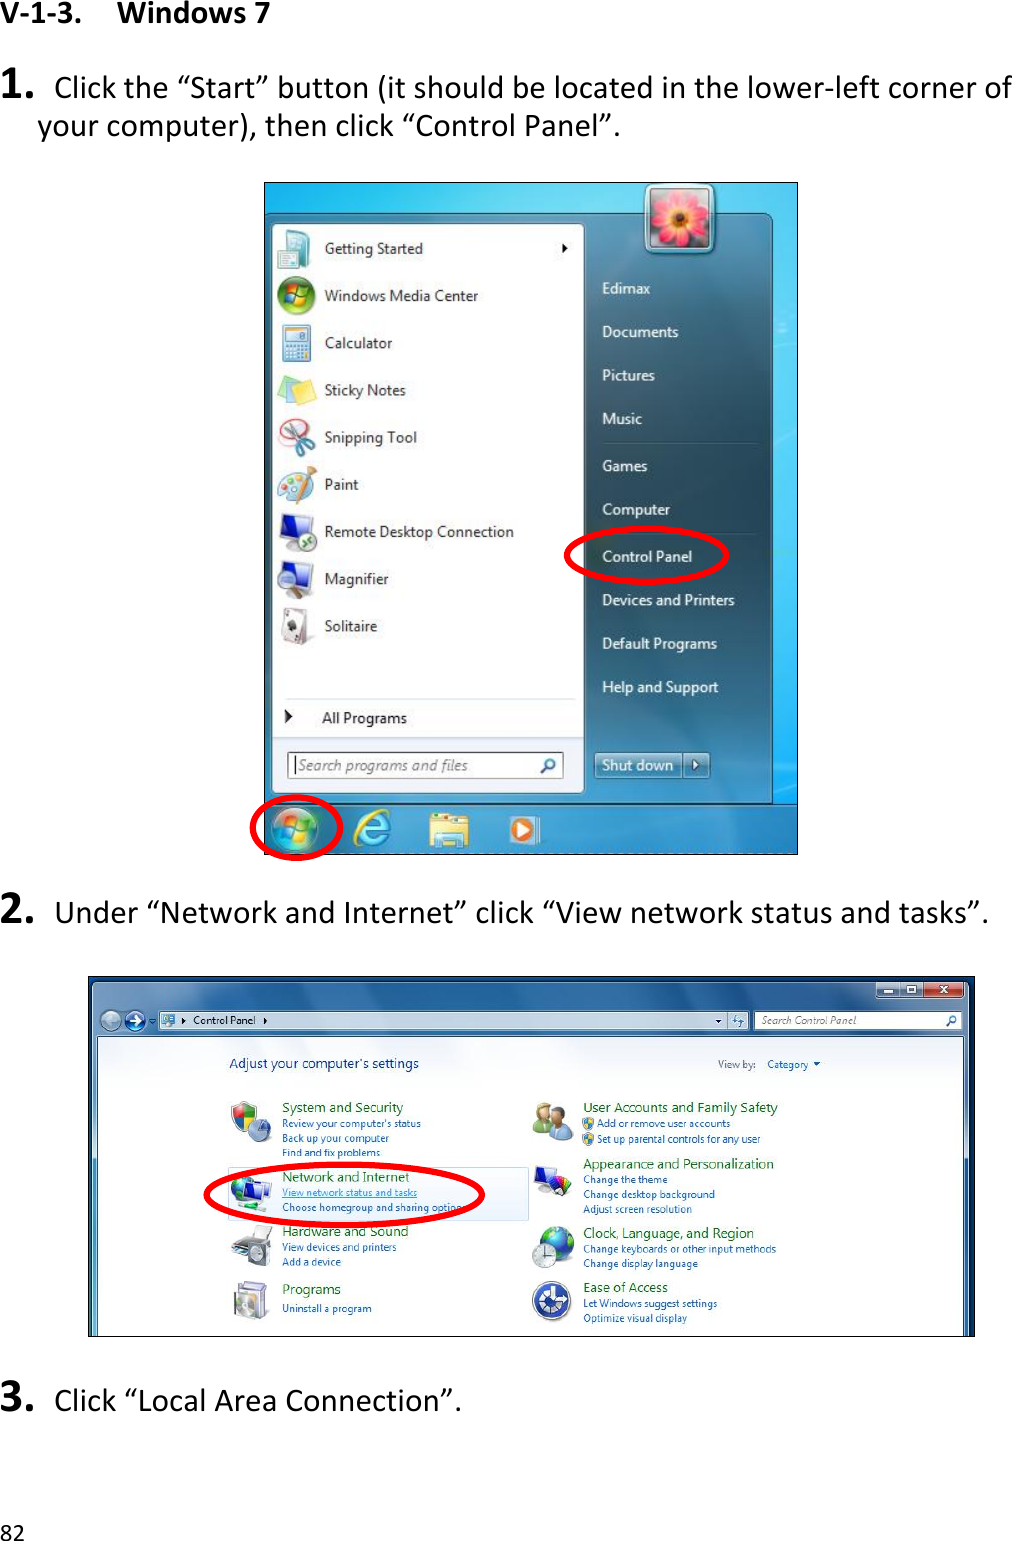 82  V-1-3.    Windows 7  1.  Click the “Start” button (it should be located in the lower-left corner of your computer), then click “Control Panel”.    2.  Under “Network and Internet” click “View network status and tasks”.    3.  Click “Local Area Connection”.  